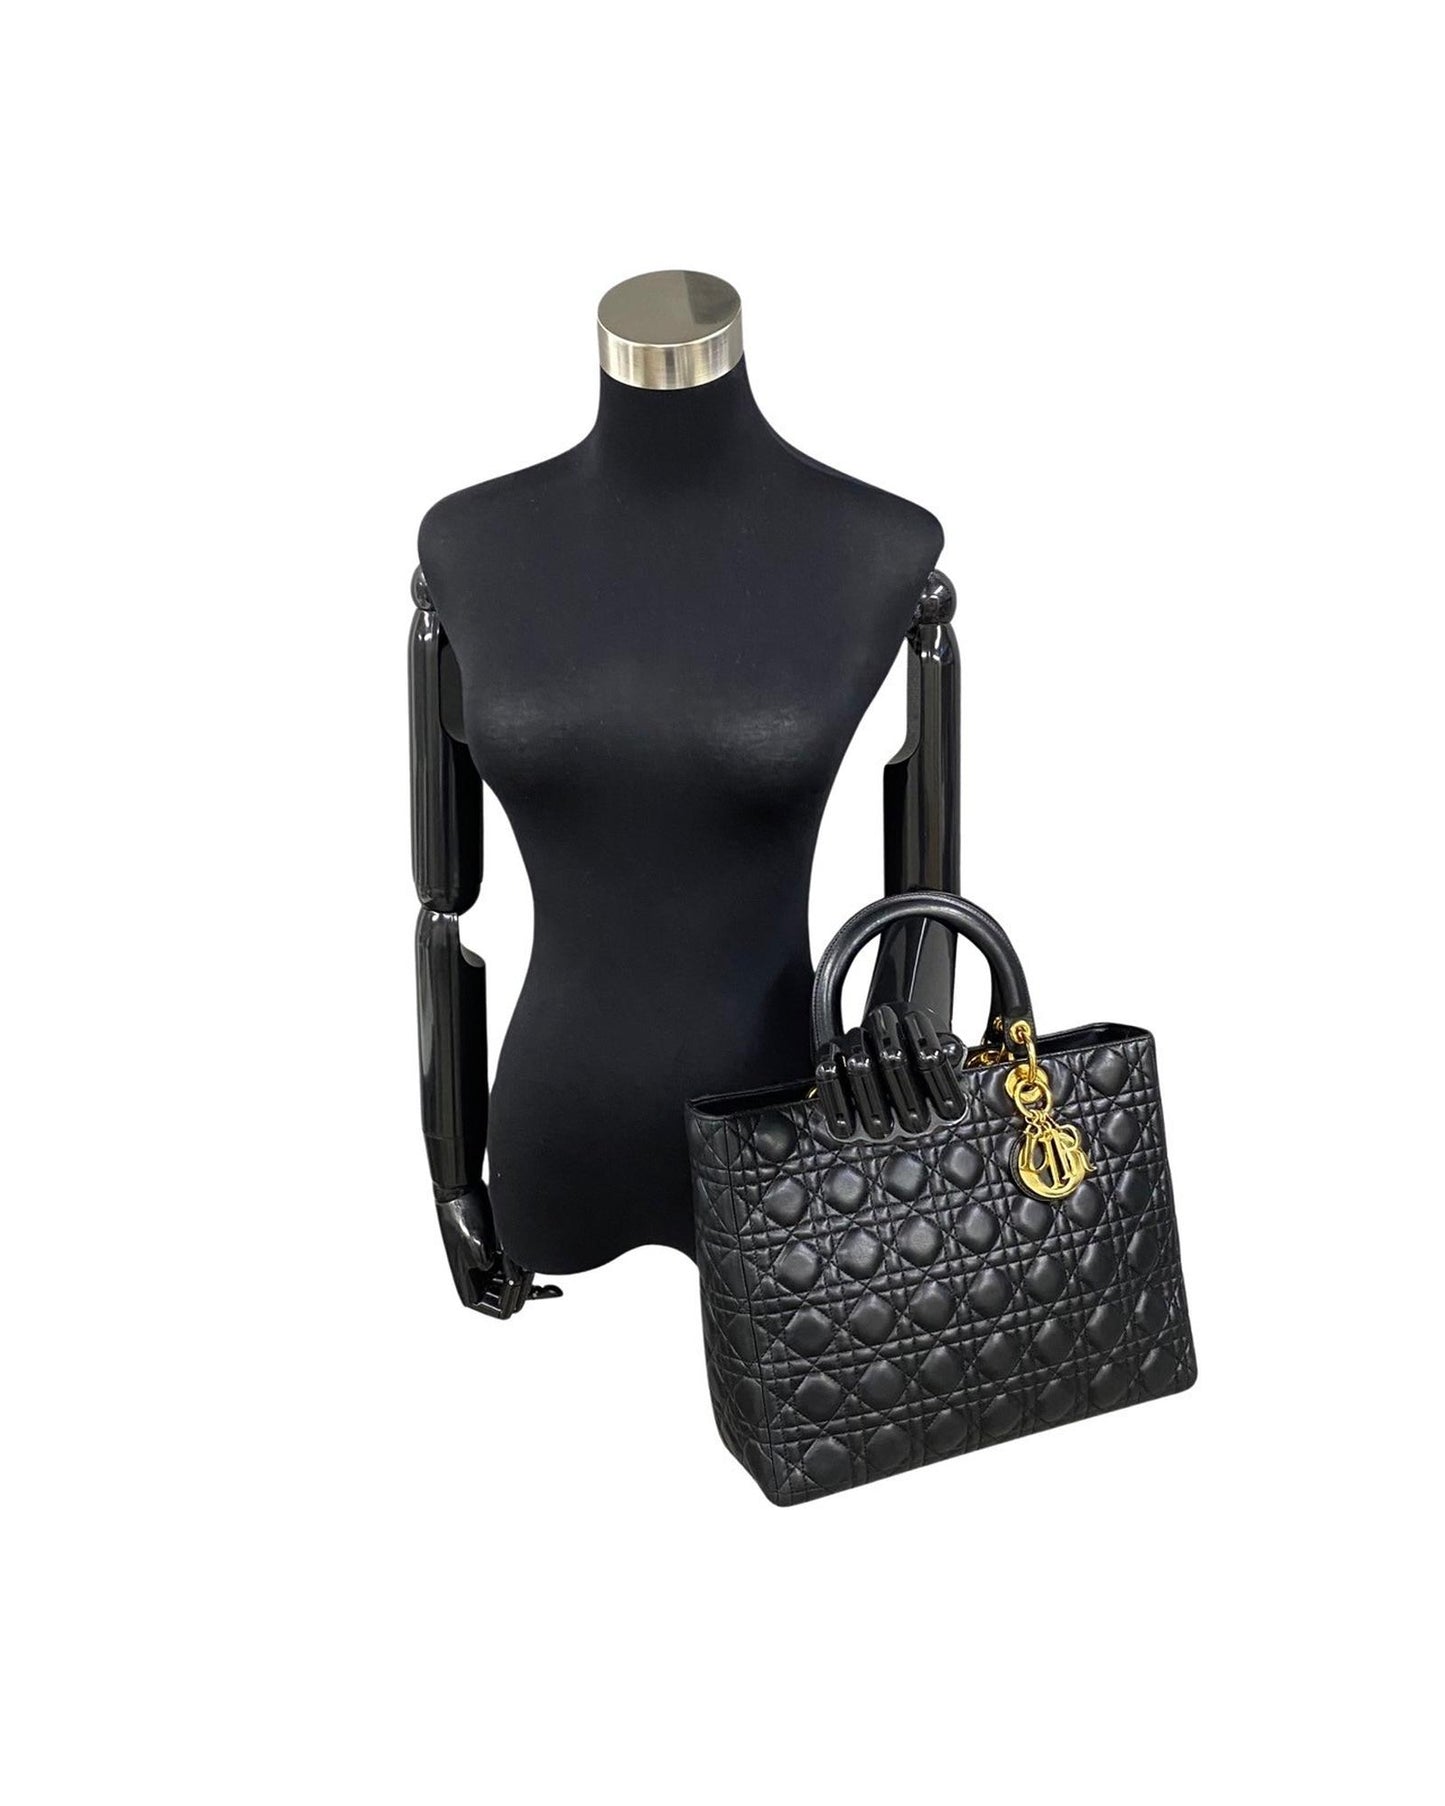 Dior Women's Large Leather Cannage Lady Bag in Black